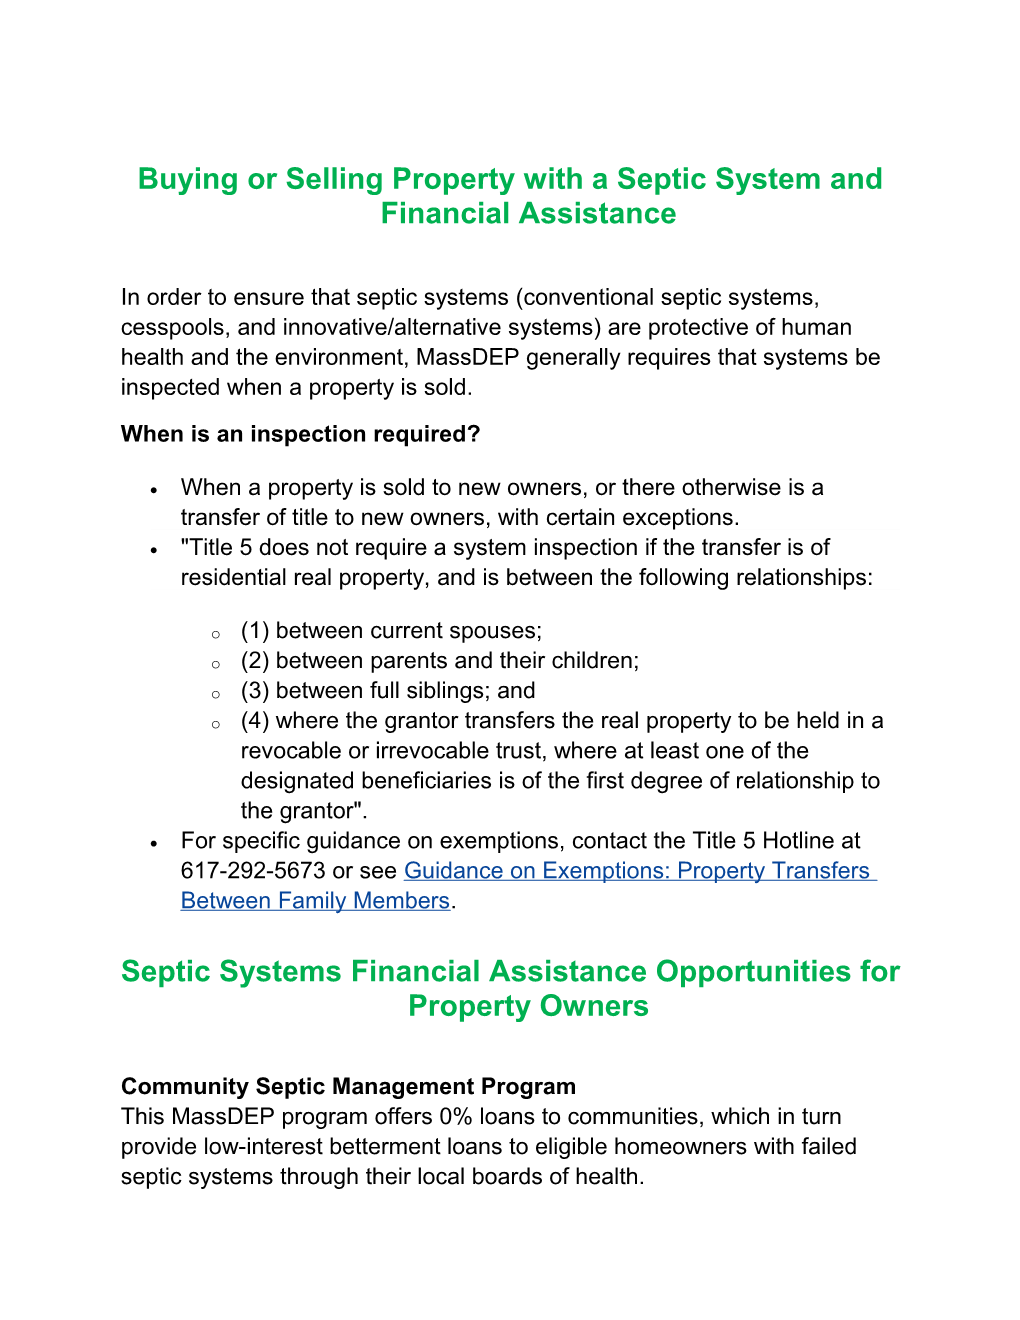 Buying Or Selling Property with a Septic System and Financial Assistance